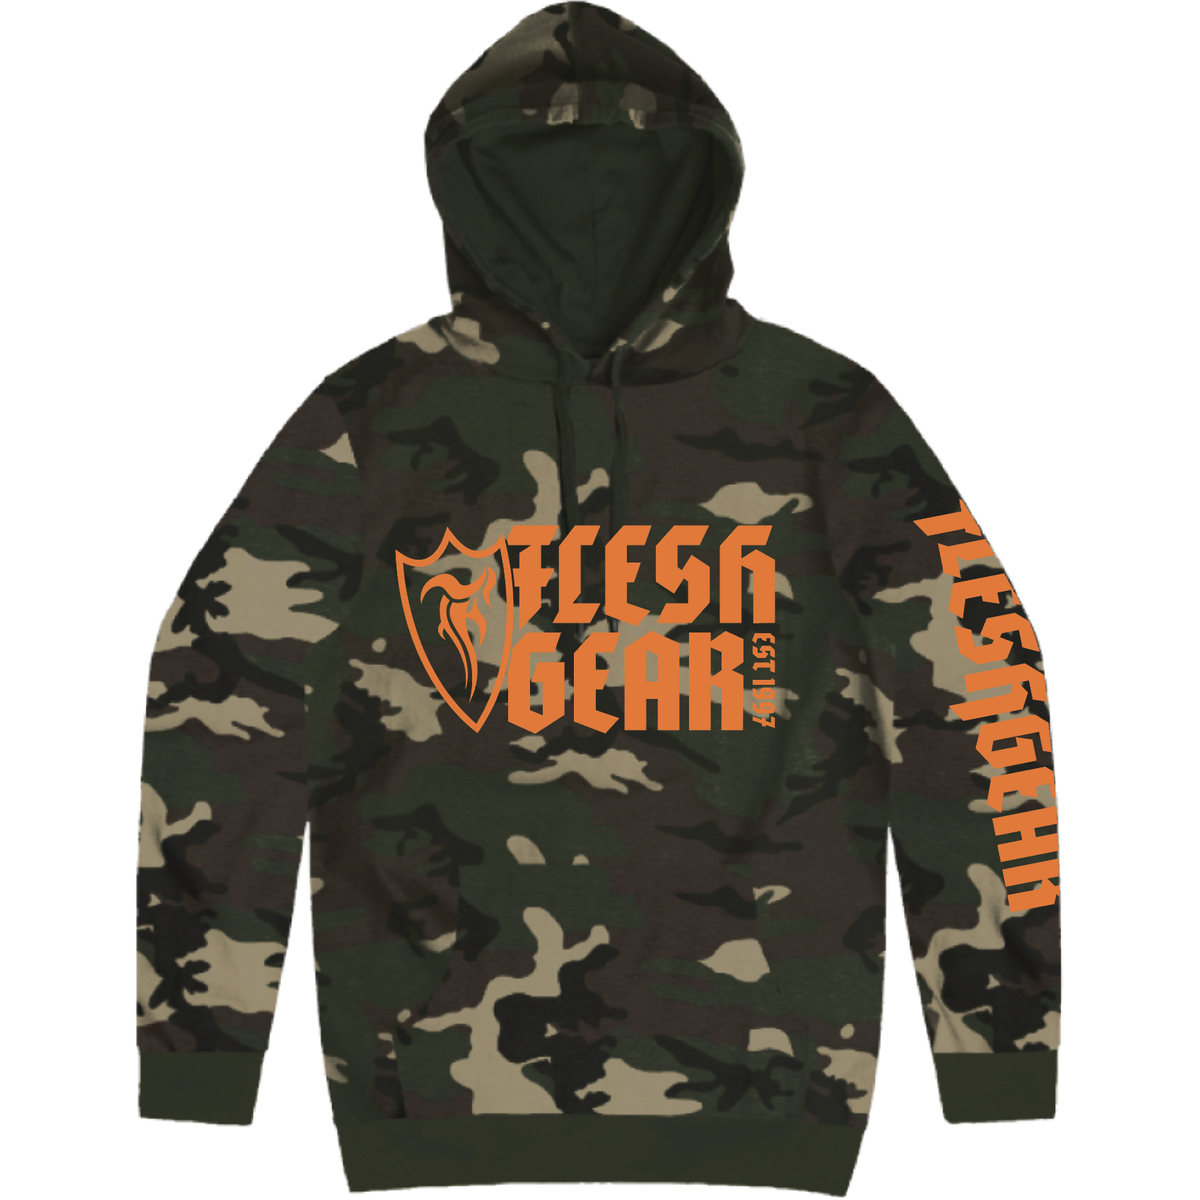 FLESHGEAR-Men's-Knit-Hooded-Pullover-Block - PULLOVER HOODIE - Synik Clothing - synikclothing.com